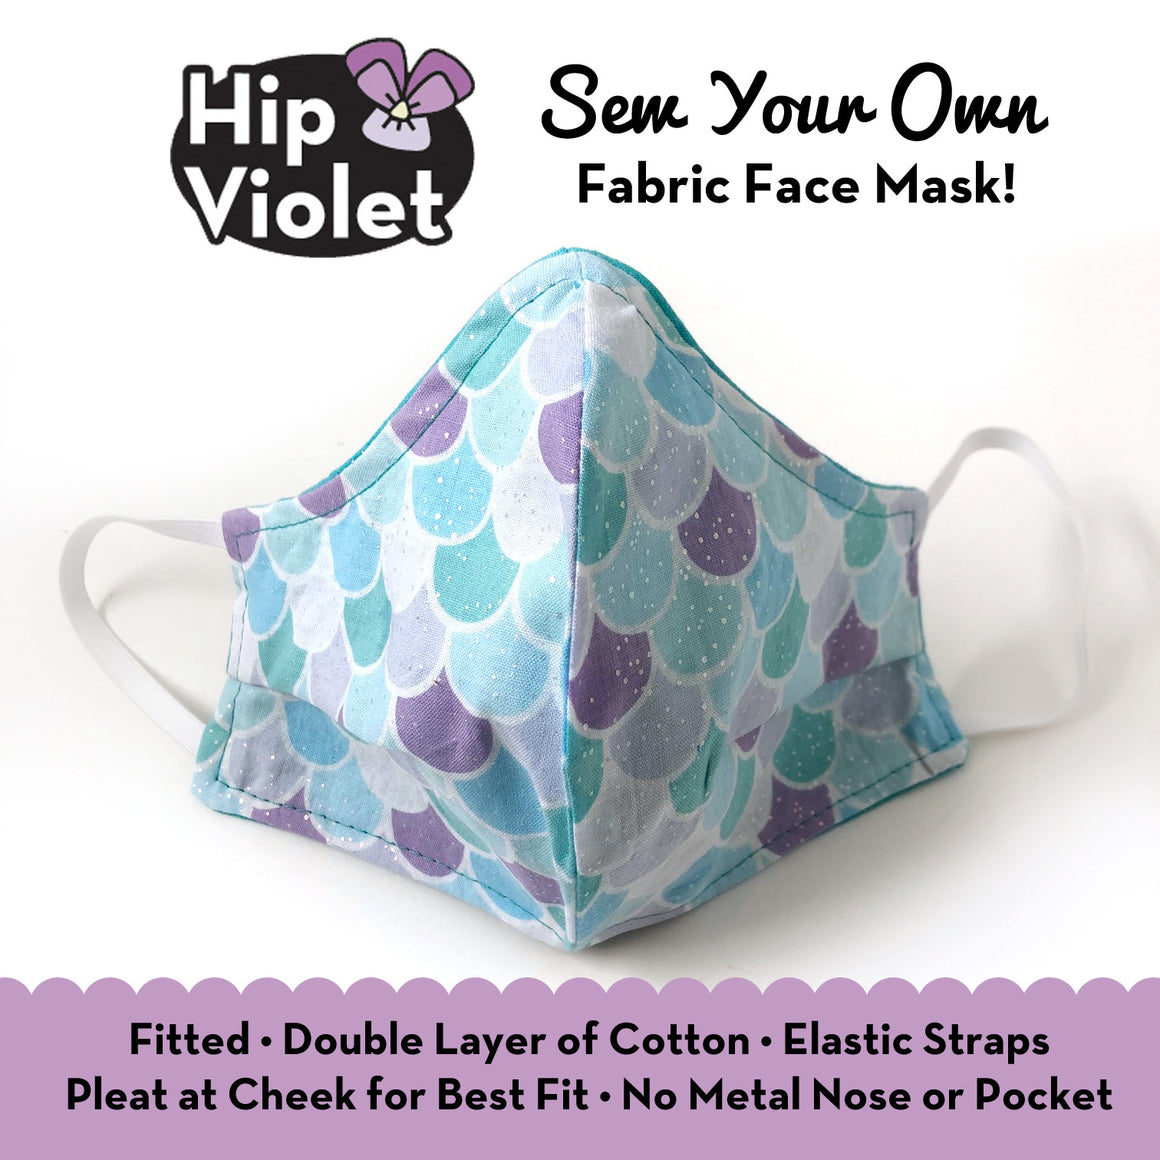 Sew-Your-Own Fabric Face Mask Pattern *FREE*